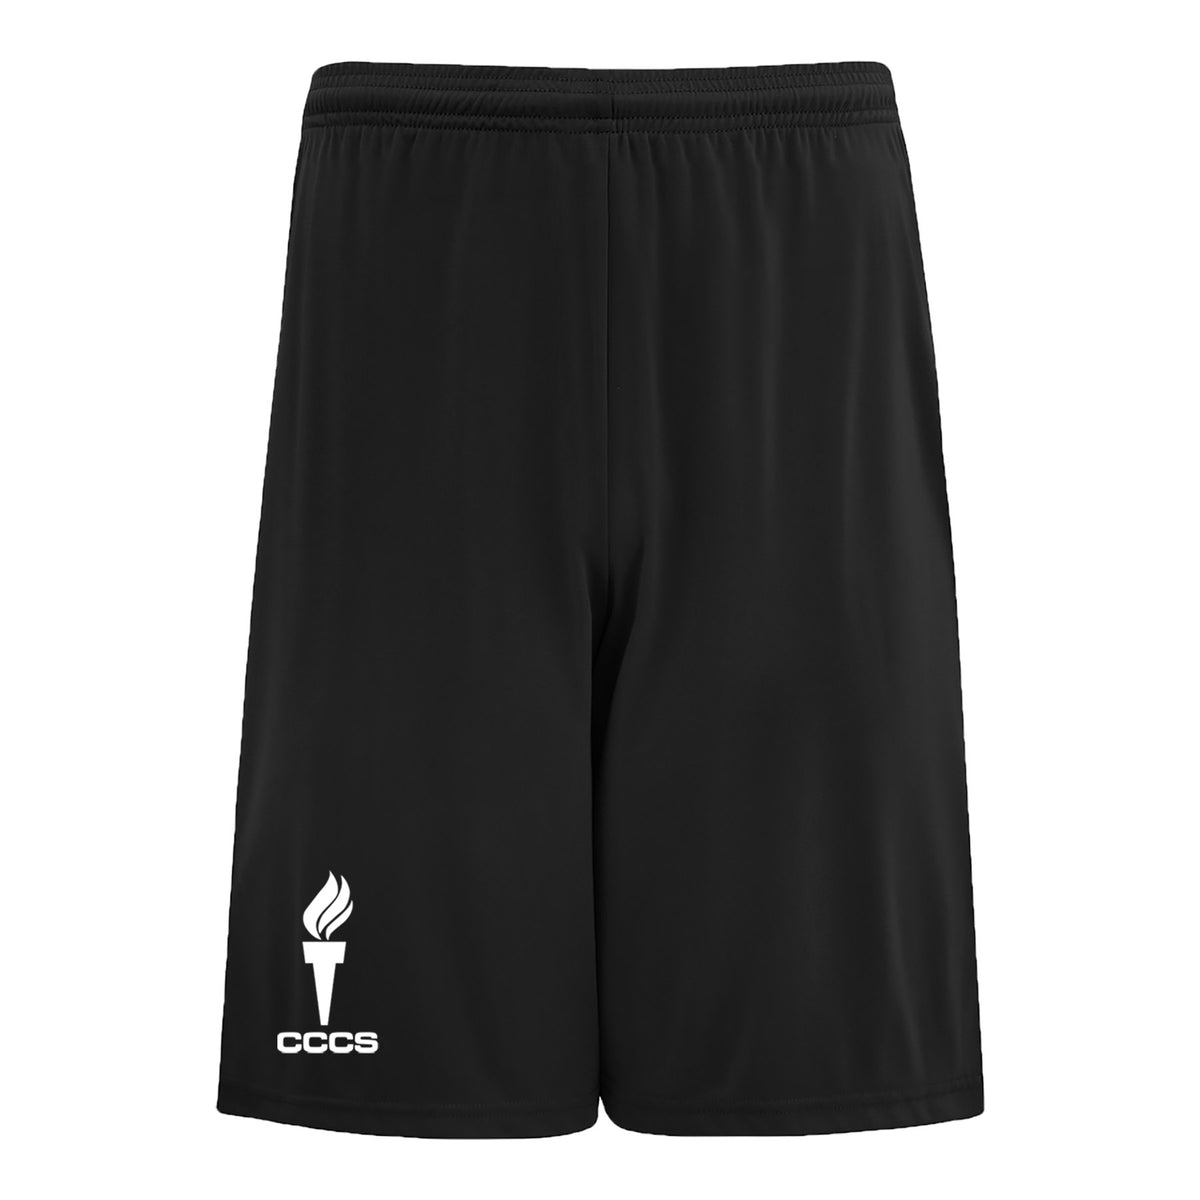 CATHEDRAL K-8 GYM SHORTS, WICKING, ADULT